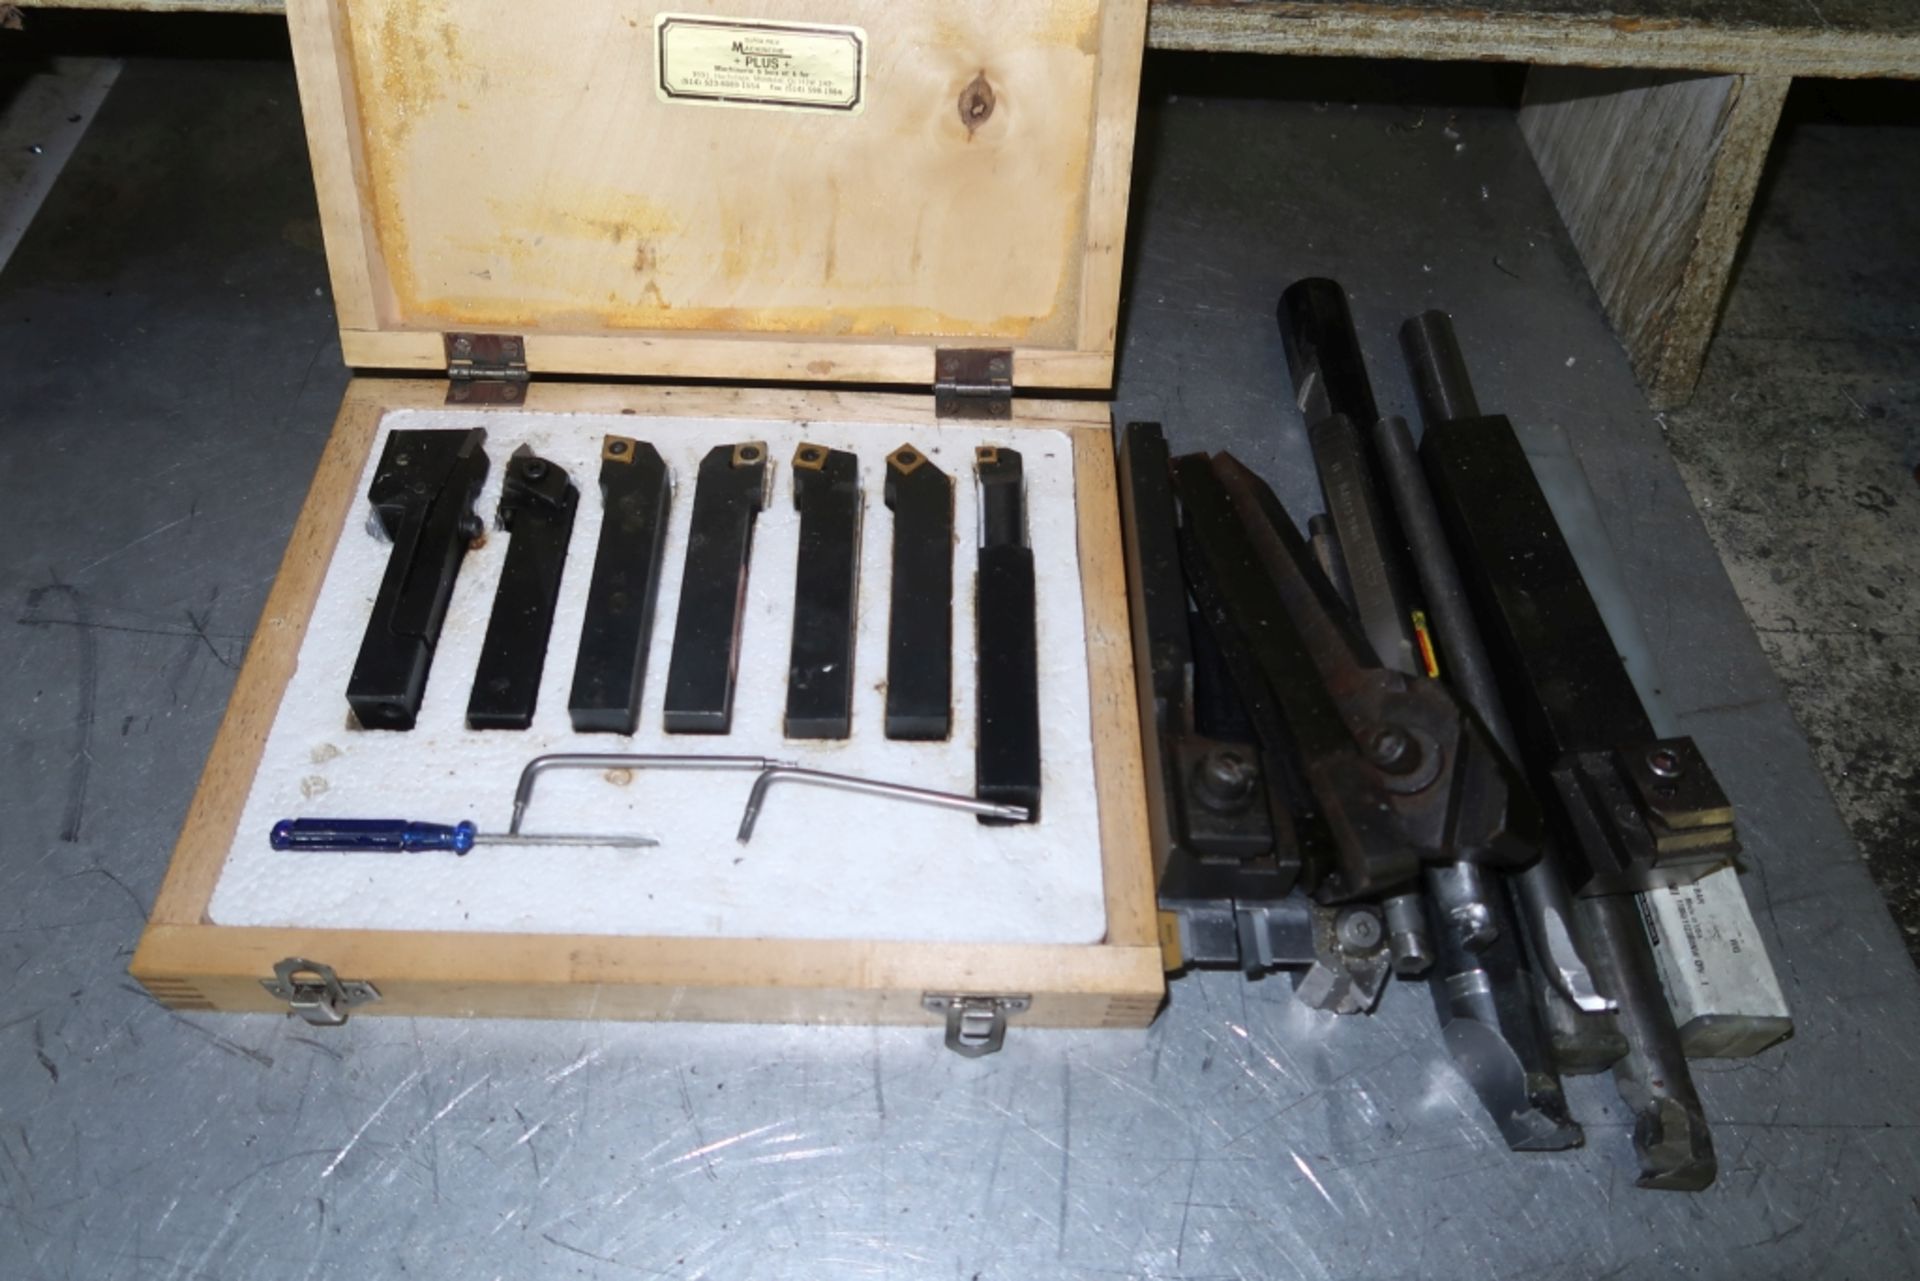 LOT OF CUTTER HOLDERS *LOCATED AT 1515 PALERME ST., BROSSARD QC*